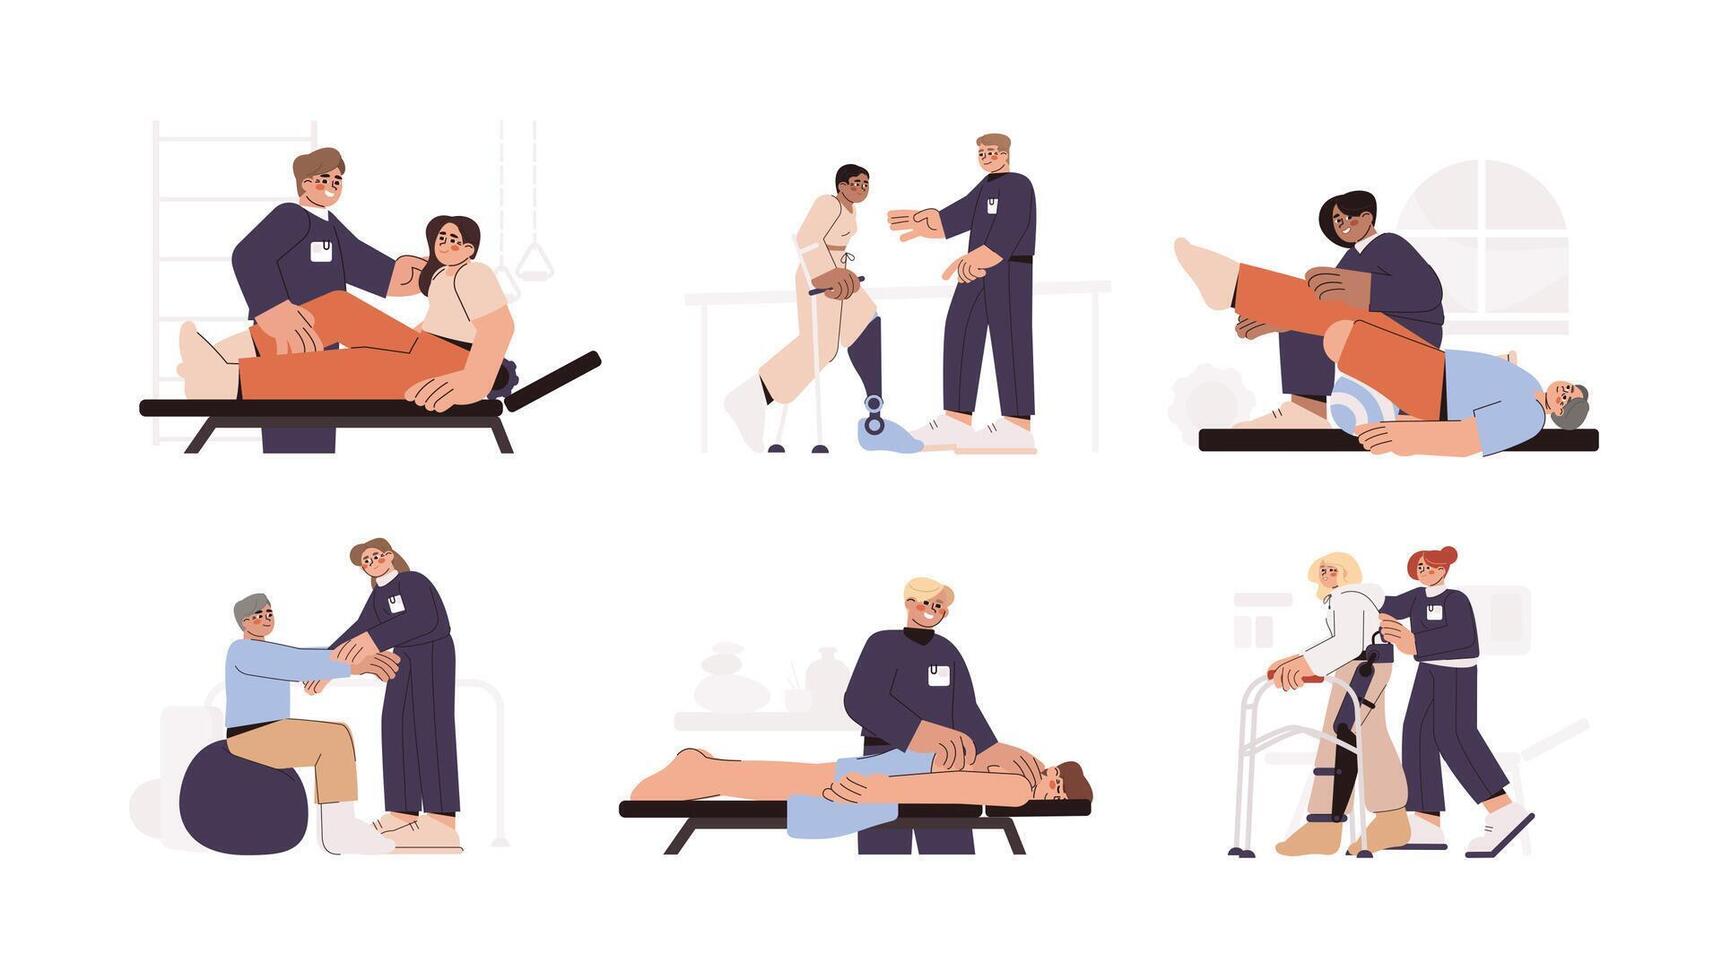 Flat physiotherapy doctors take care of people rehab. Physical therapist or orthopedic help patient recovery after leg, knee or back injuries. Exercises with medical equipment in rehabilitation clinic vector